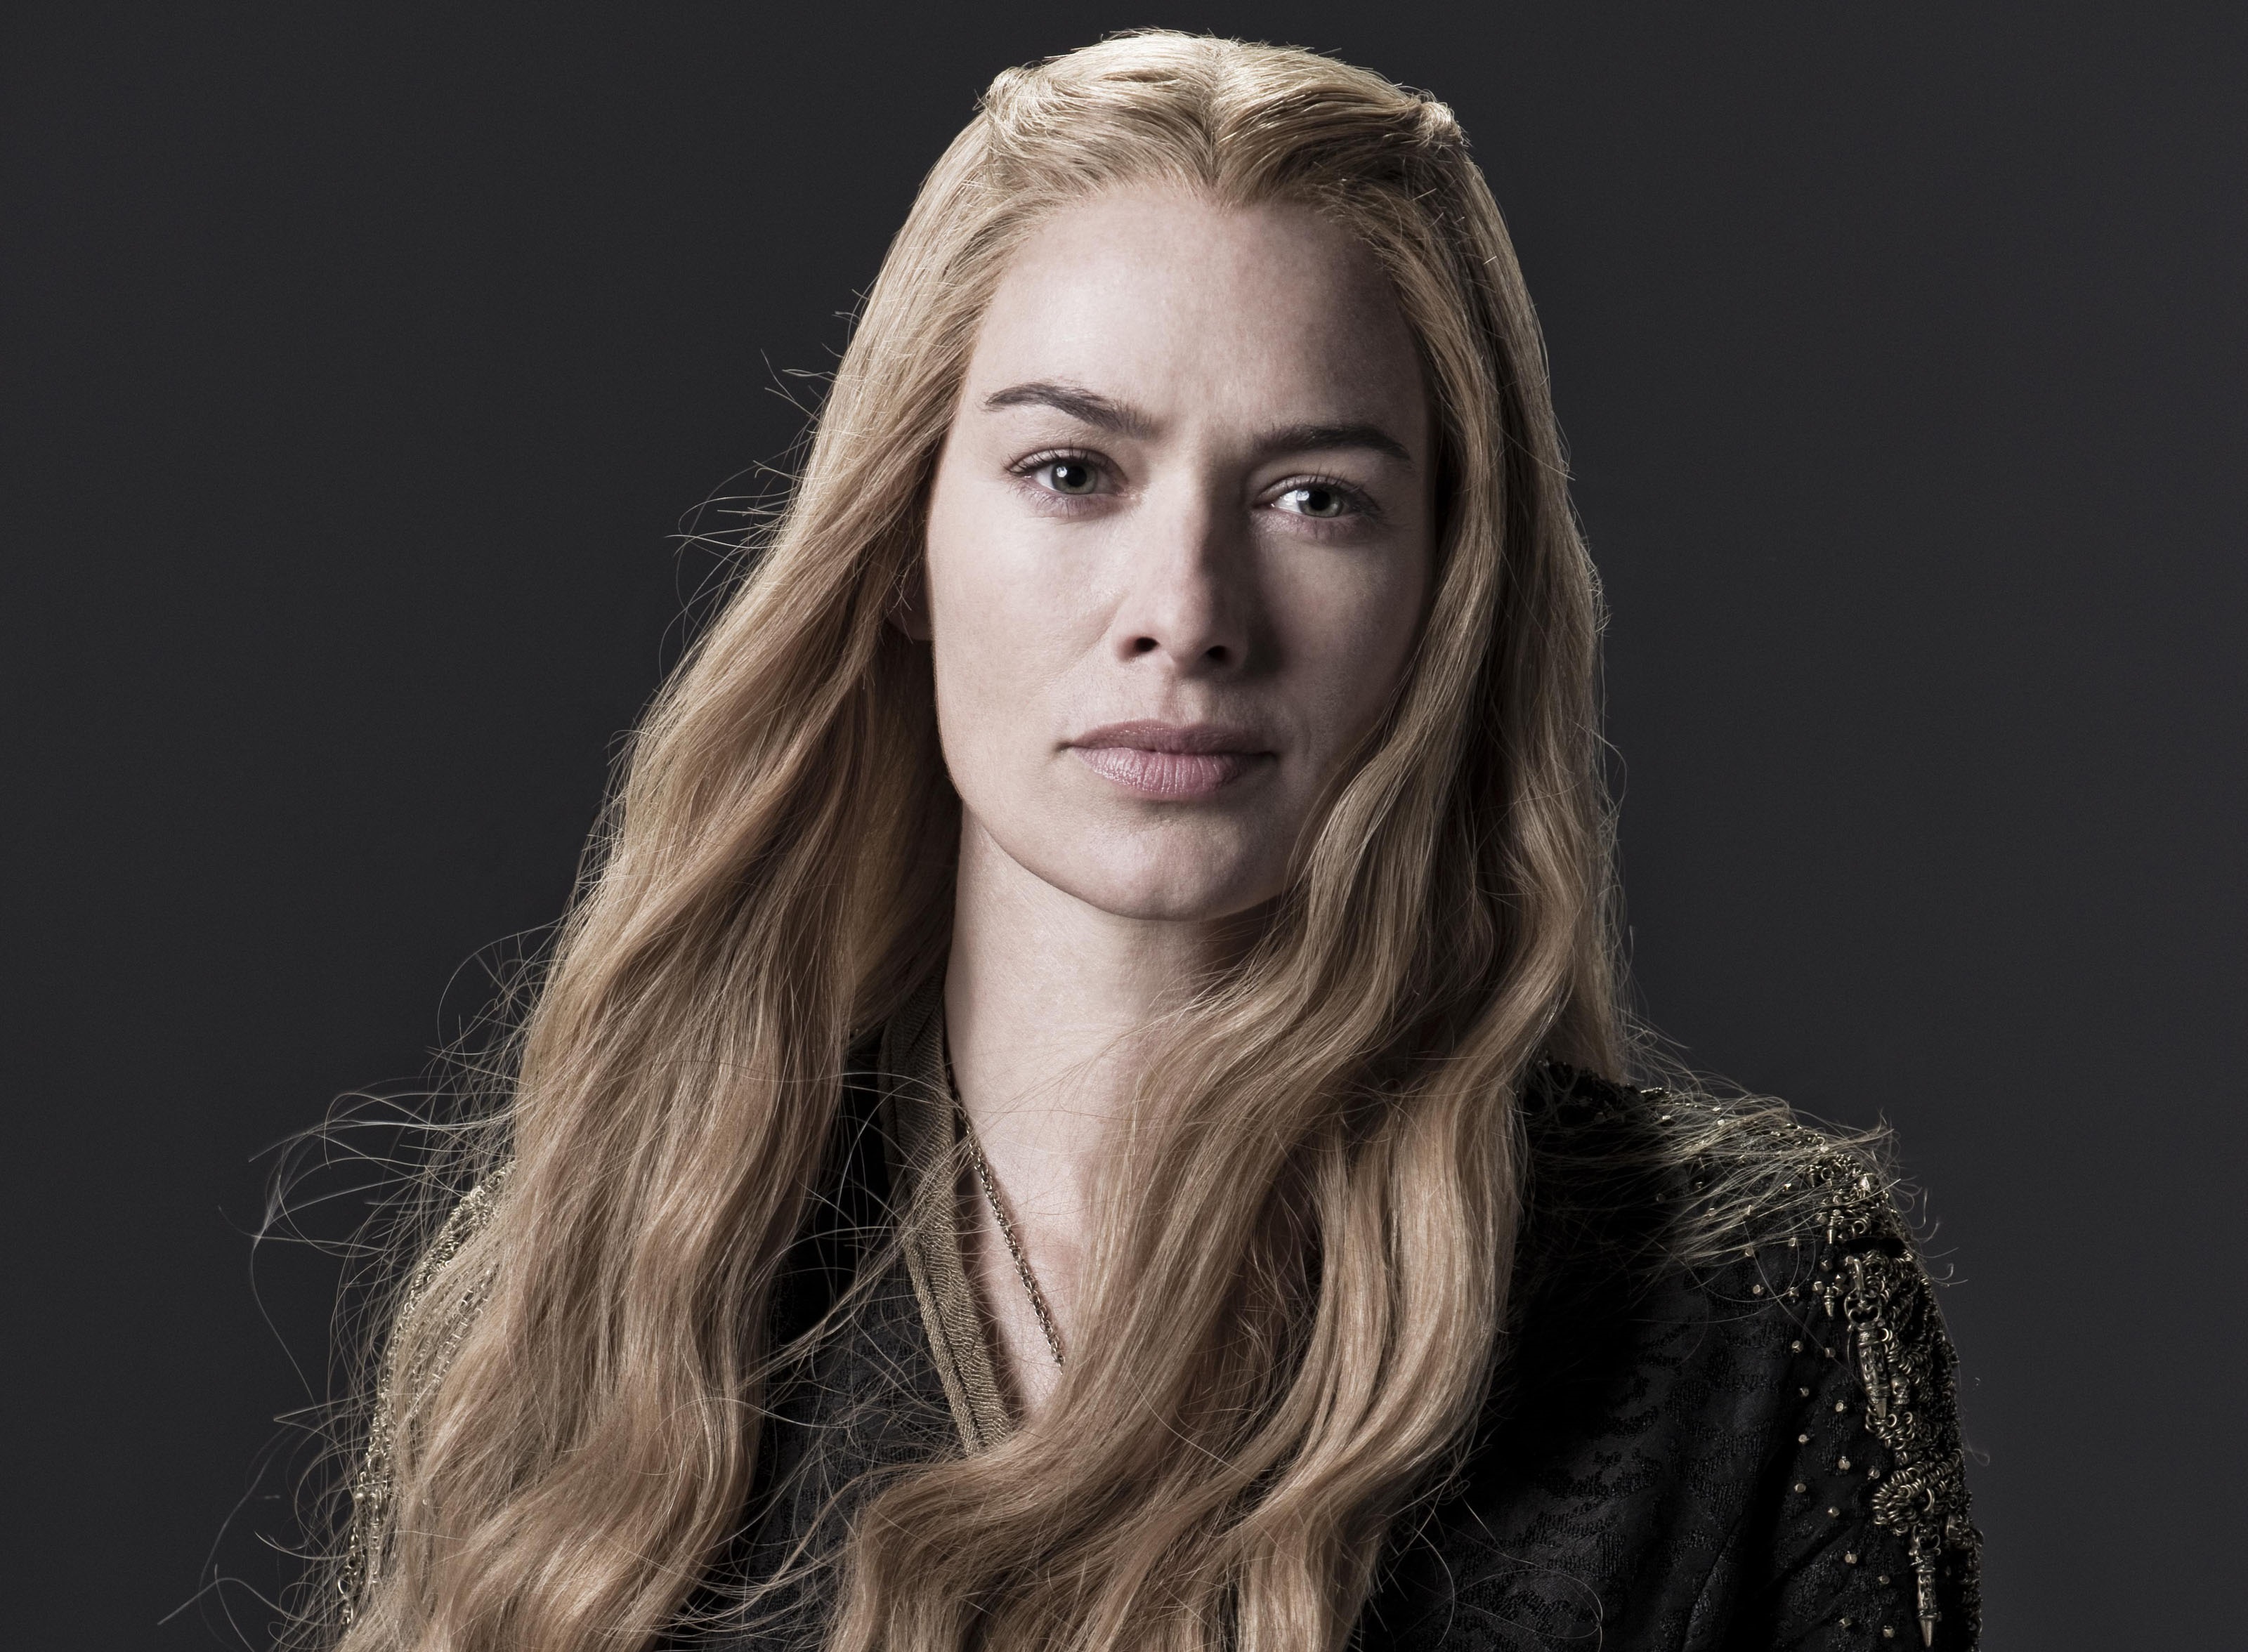 190+ Cersei Lannister HD Wallpapers and Backgrounds